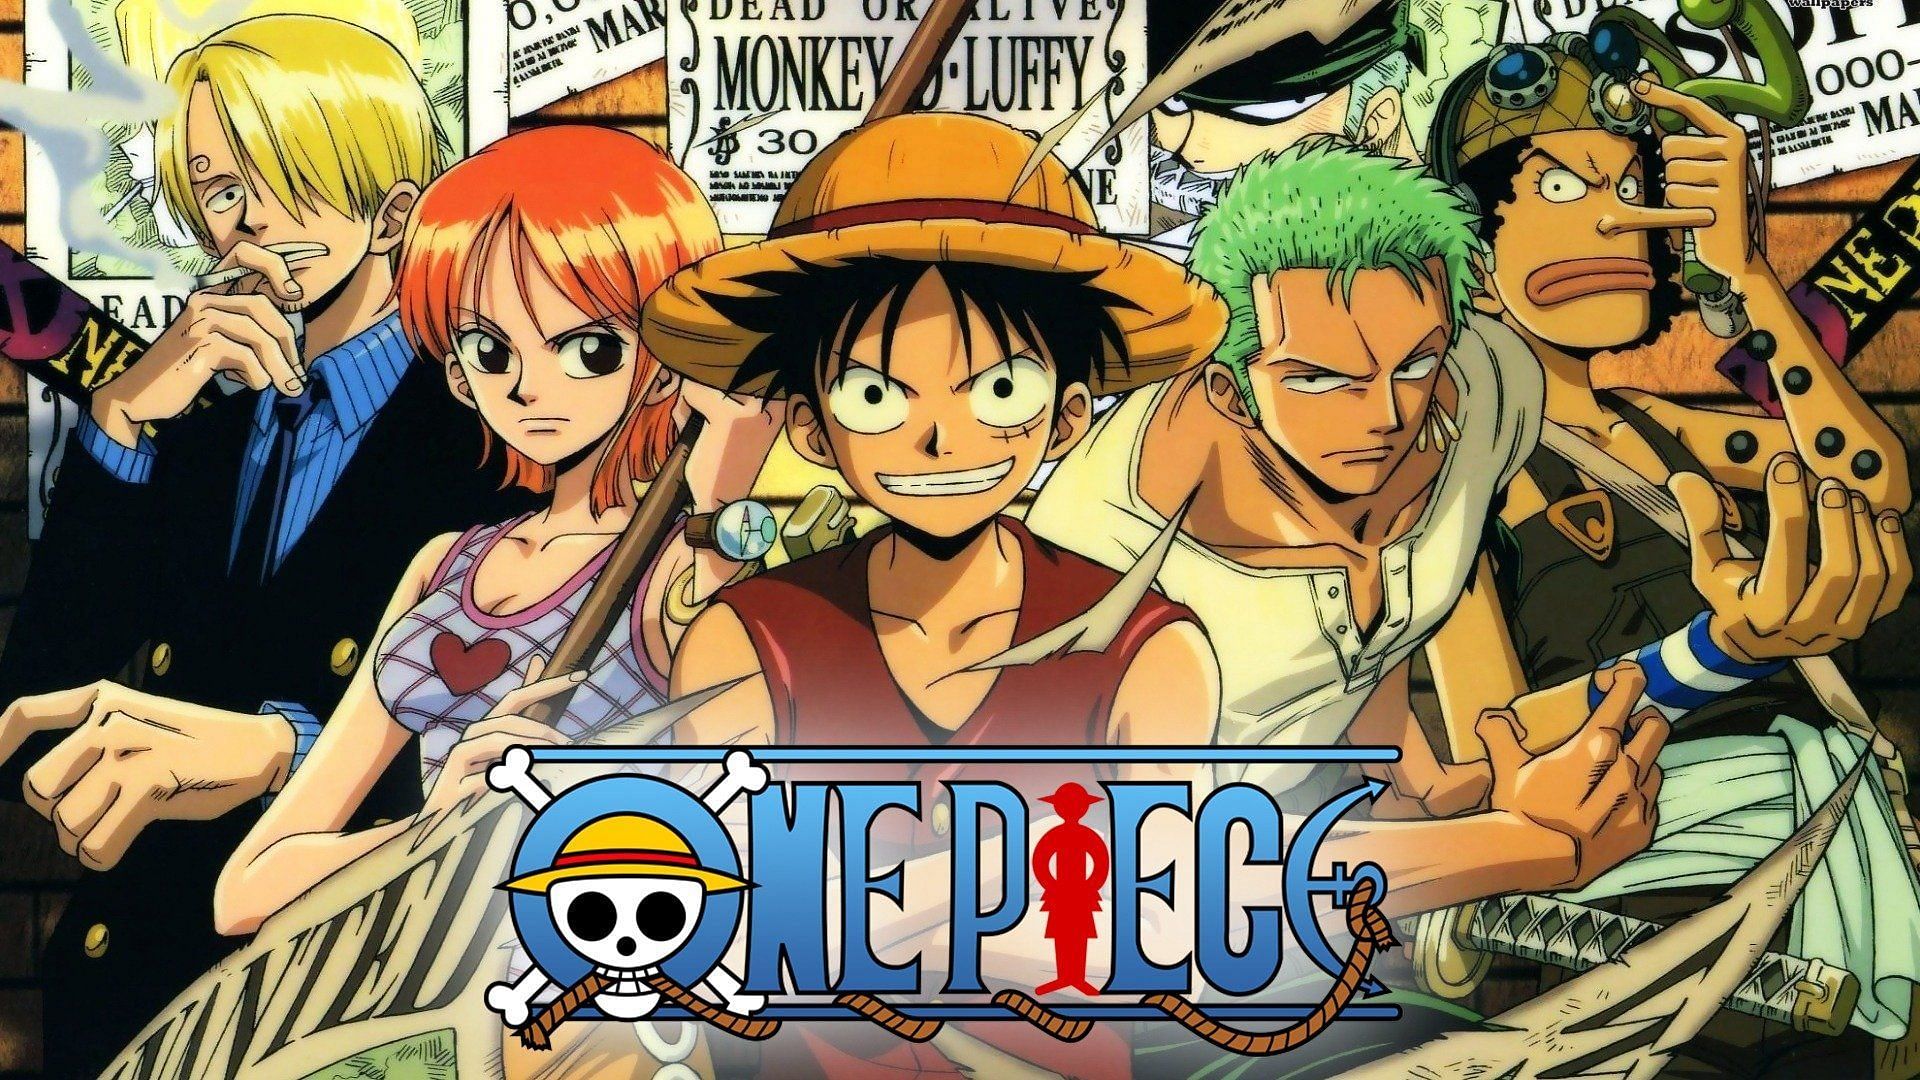 25 OnePiece Profile Pic ideas in 2023  one piece anime one piece manga one  piece anime